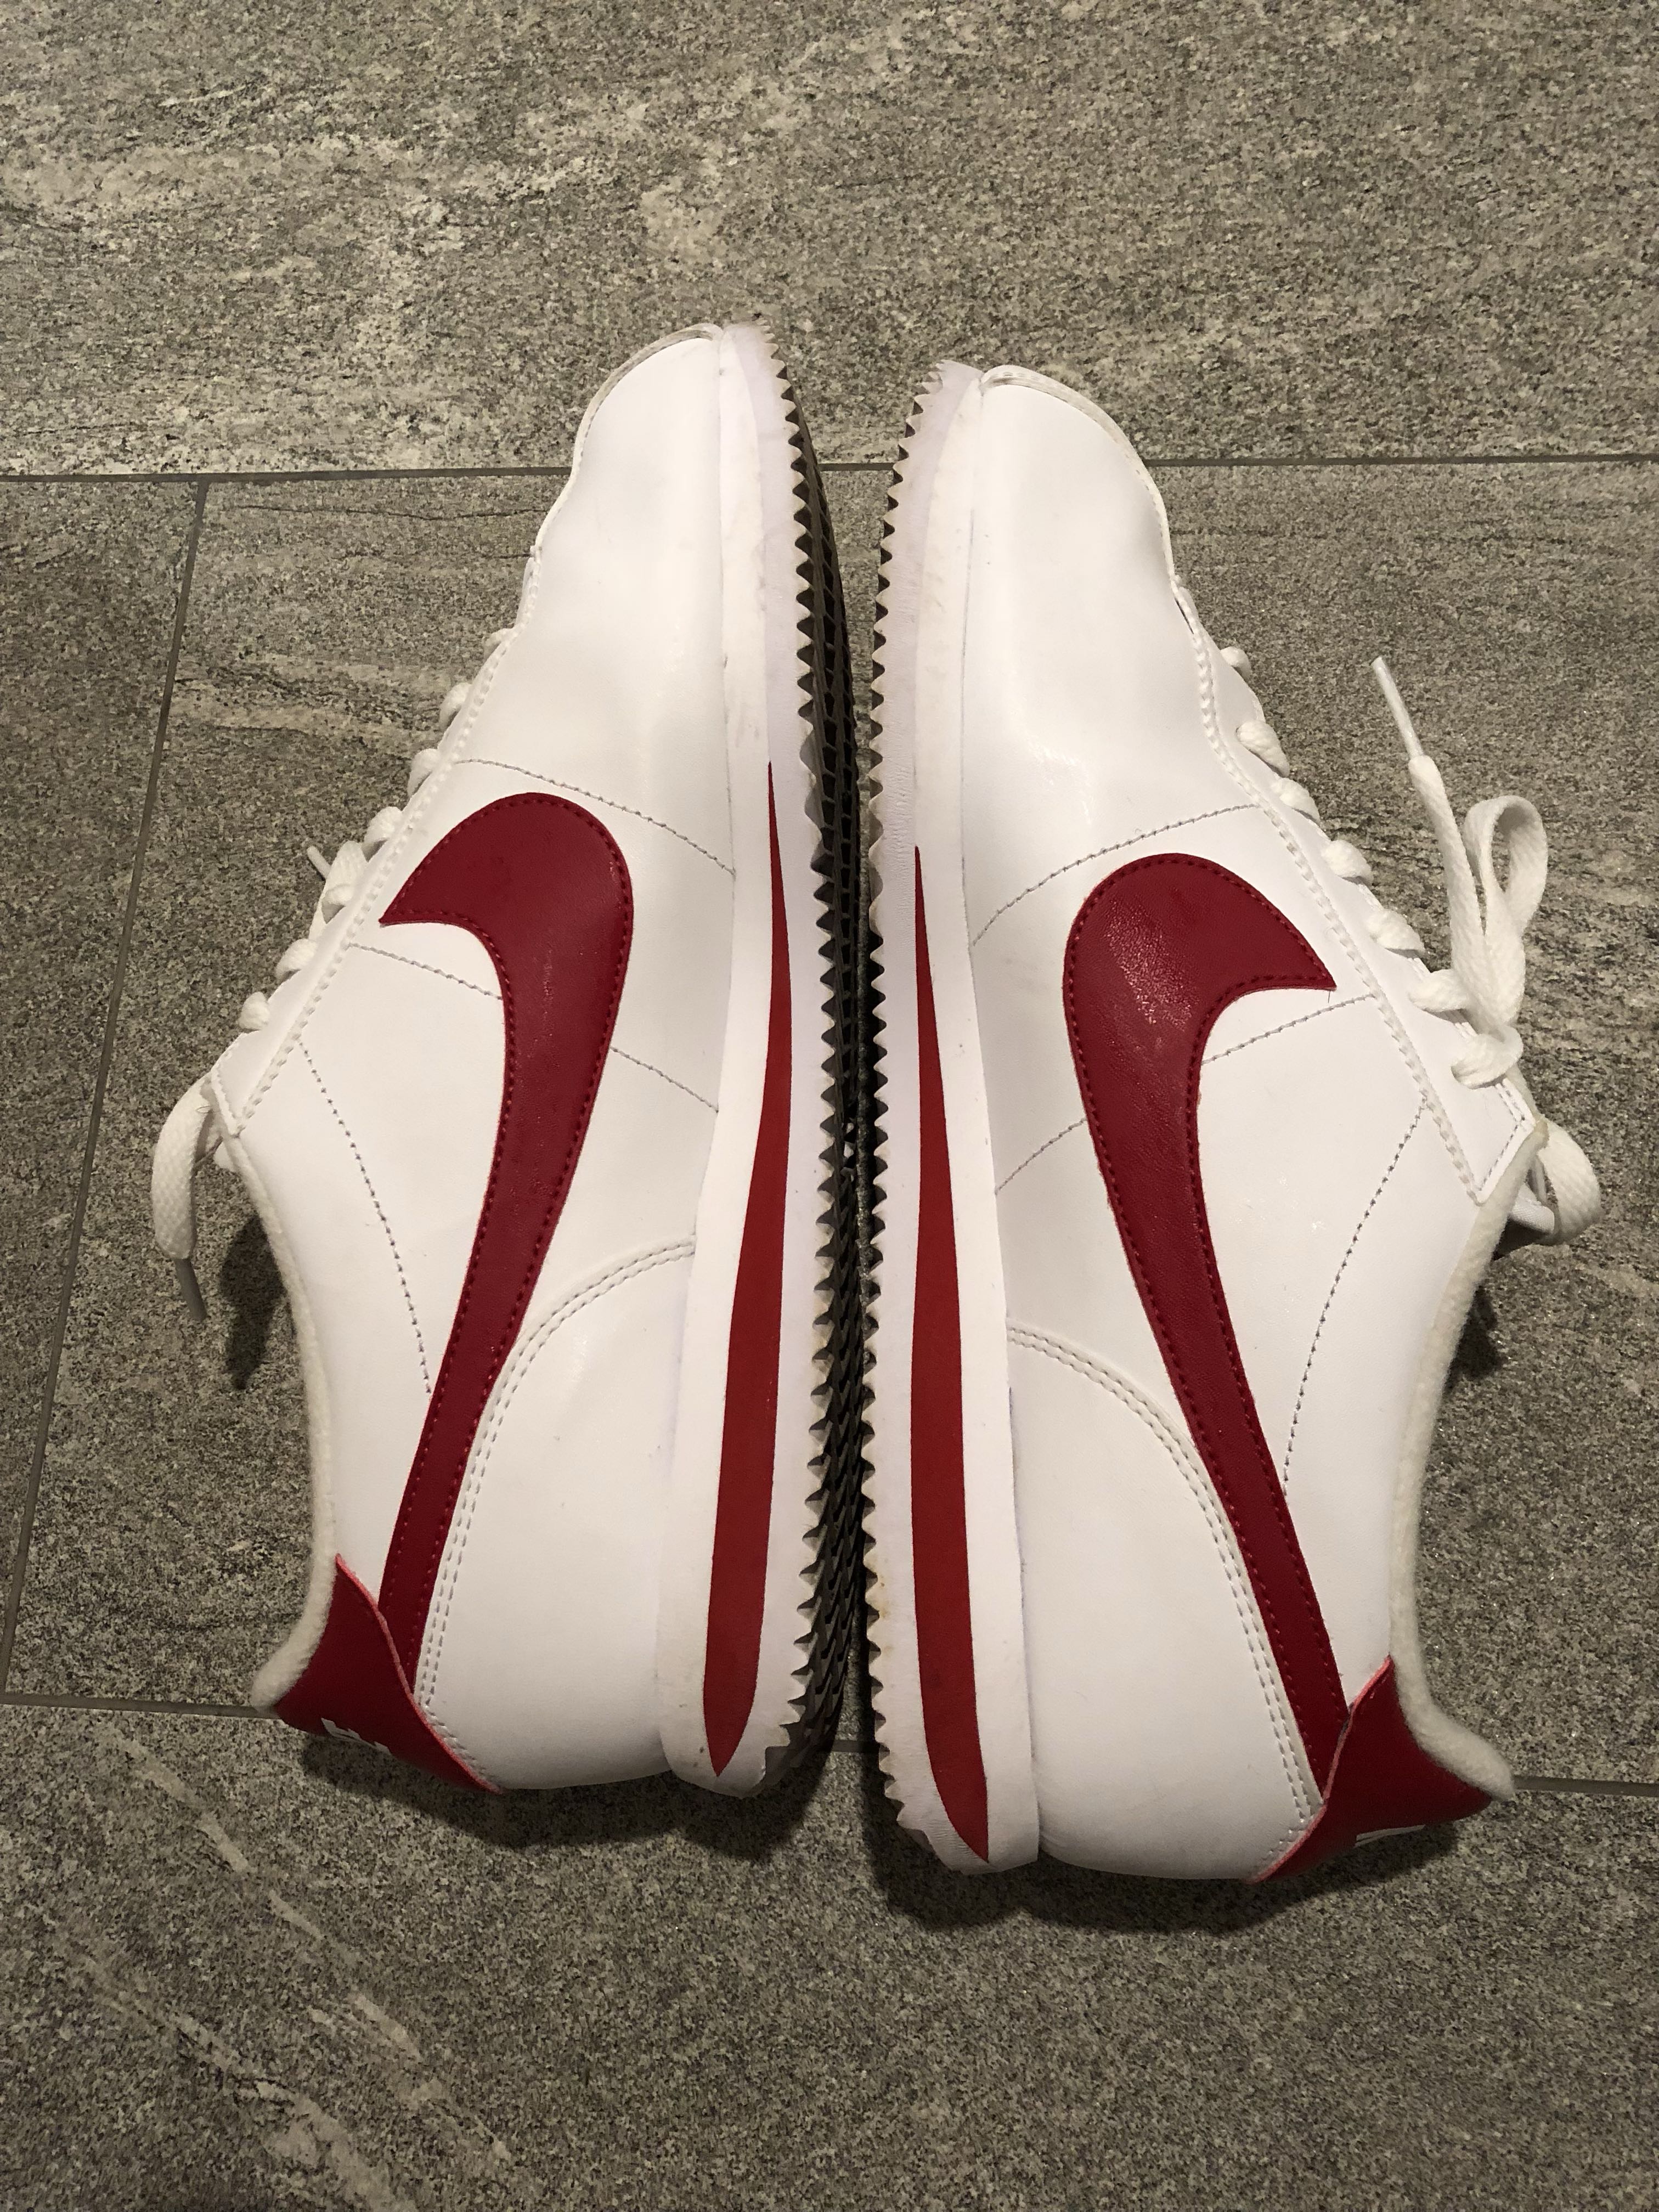 nike white shoes red swoosh